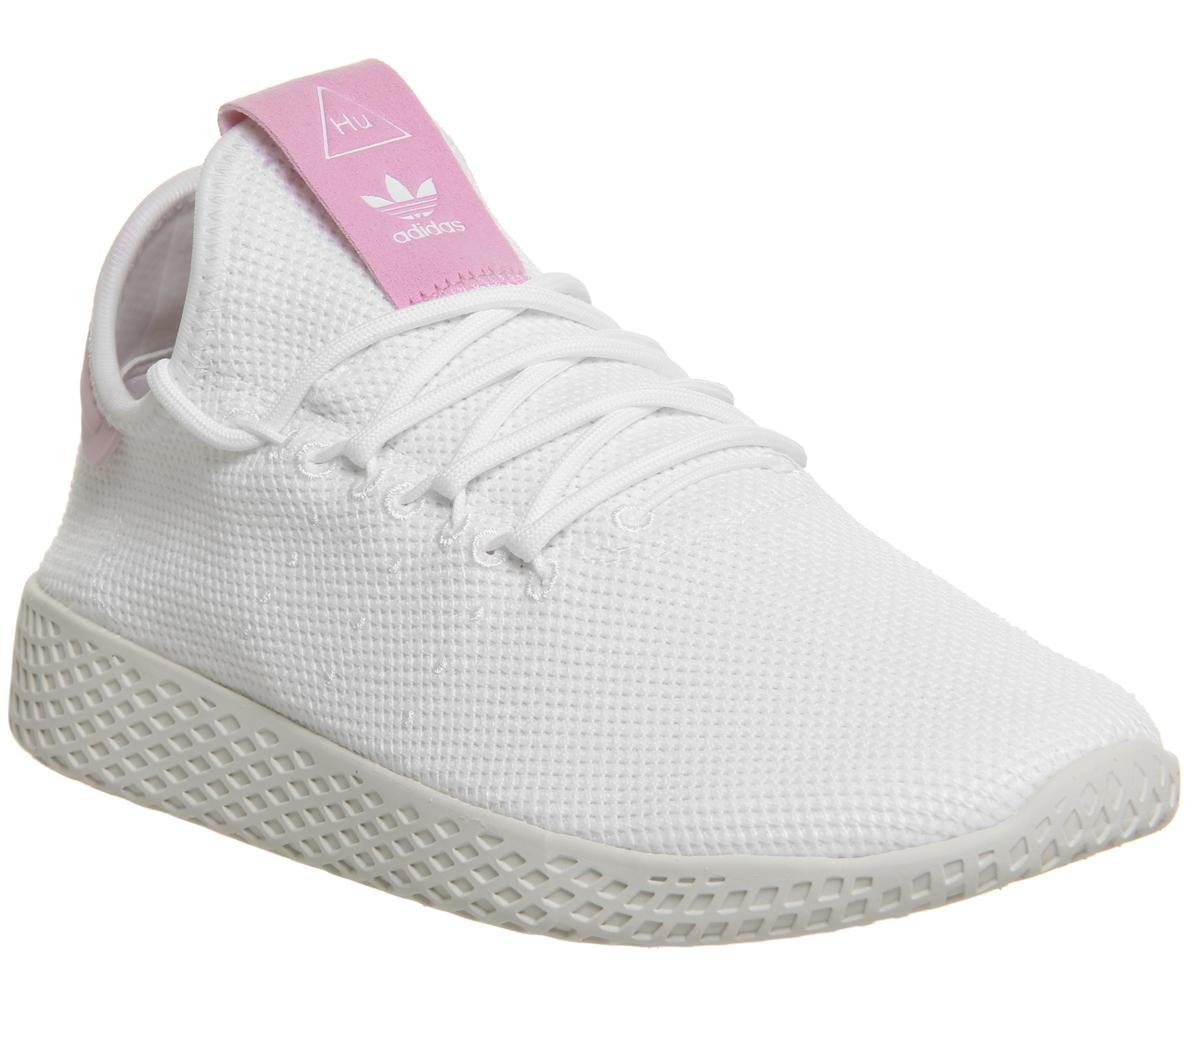 pharrell williams shoes white and pink